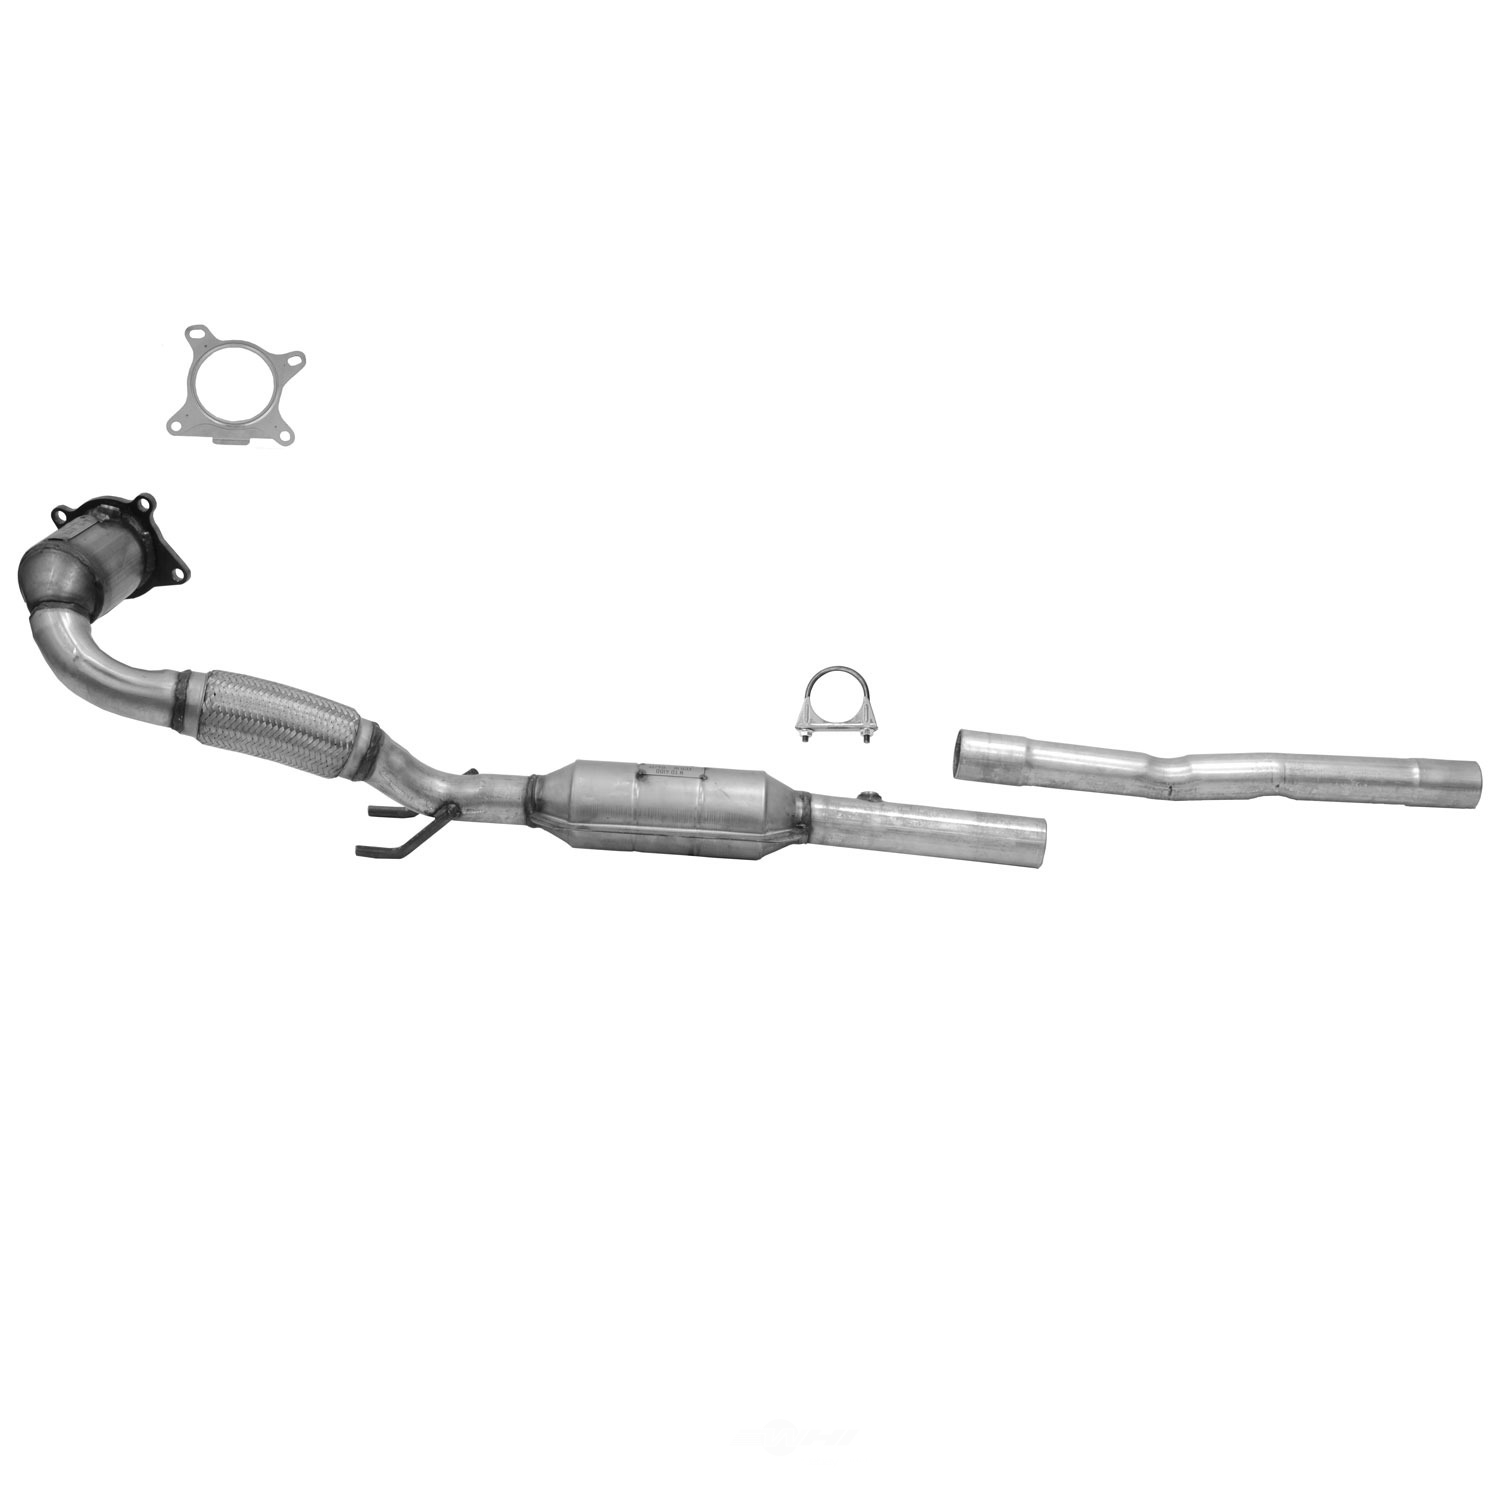 AP EXHAUST FEDERAL CONVERTER - Direct Fit Converter - APG 644087